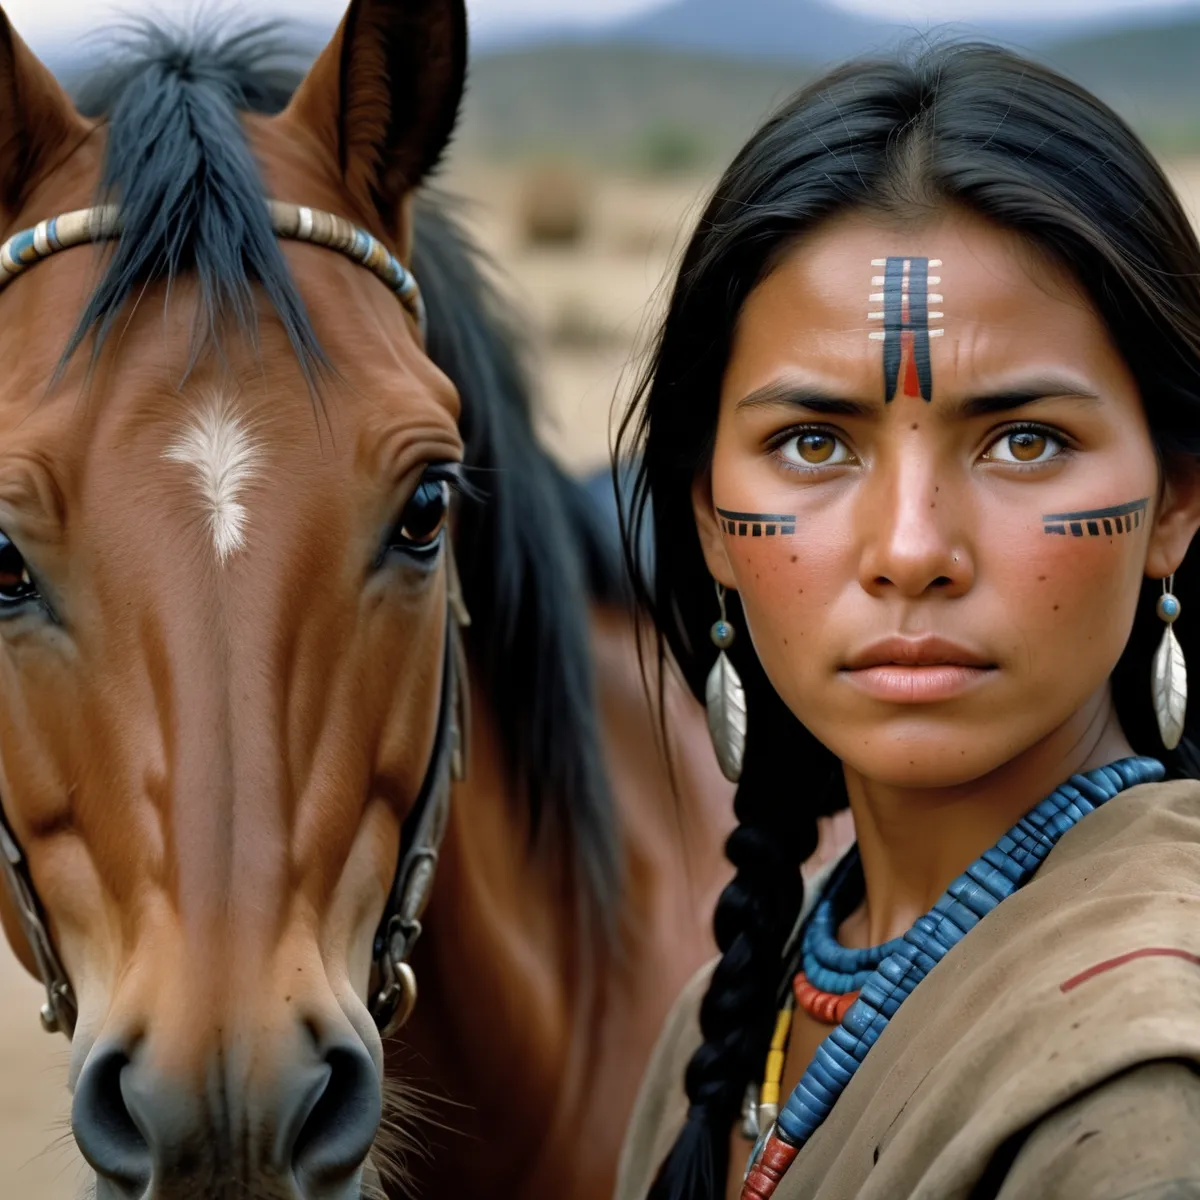 AI generated image using Stable Diffusion of a Native American woman with traditional face paint and jewelry, standing next to a horse.